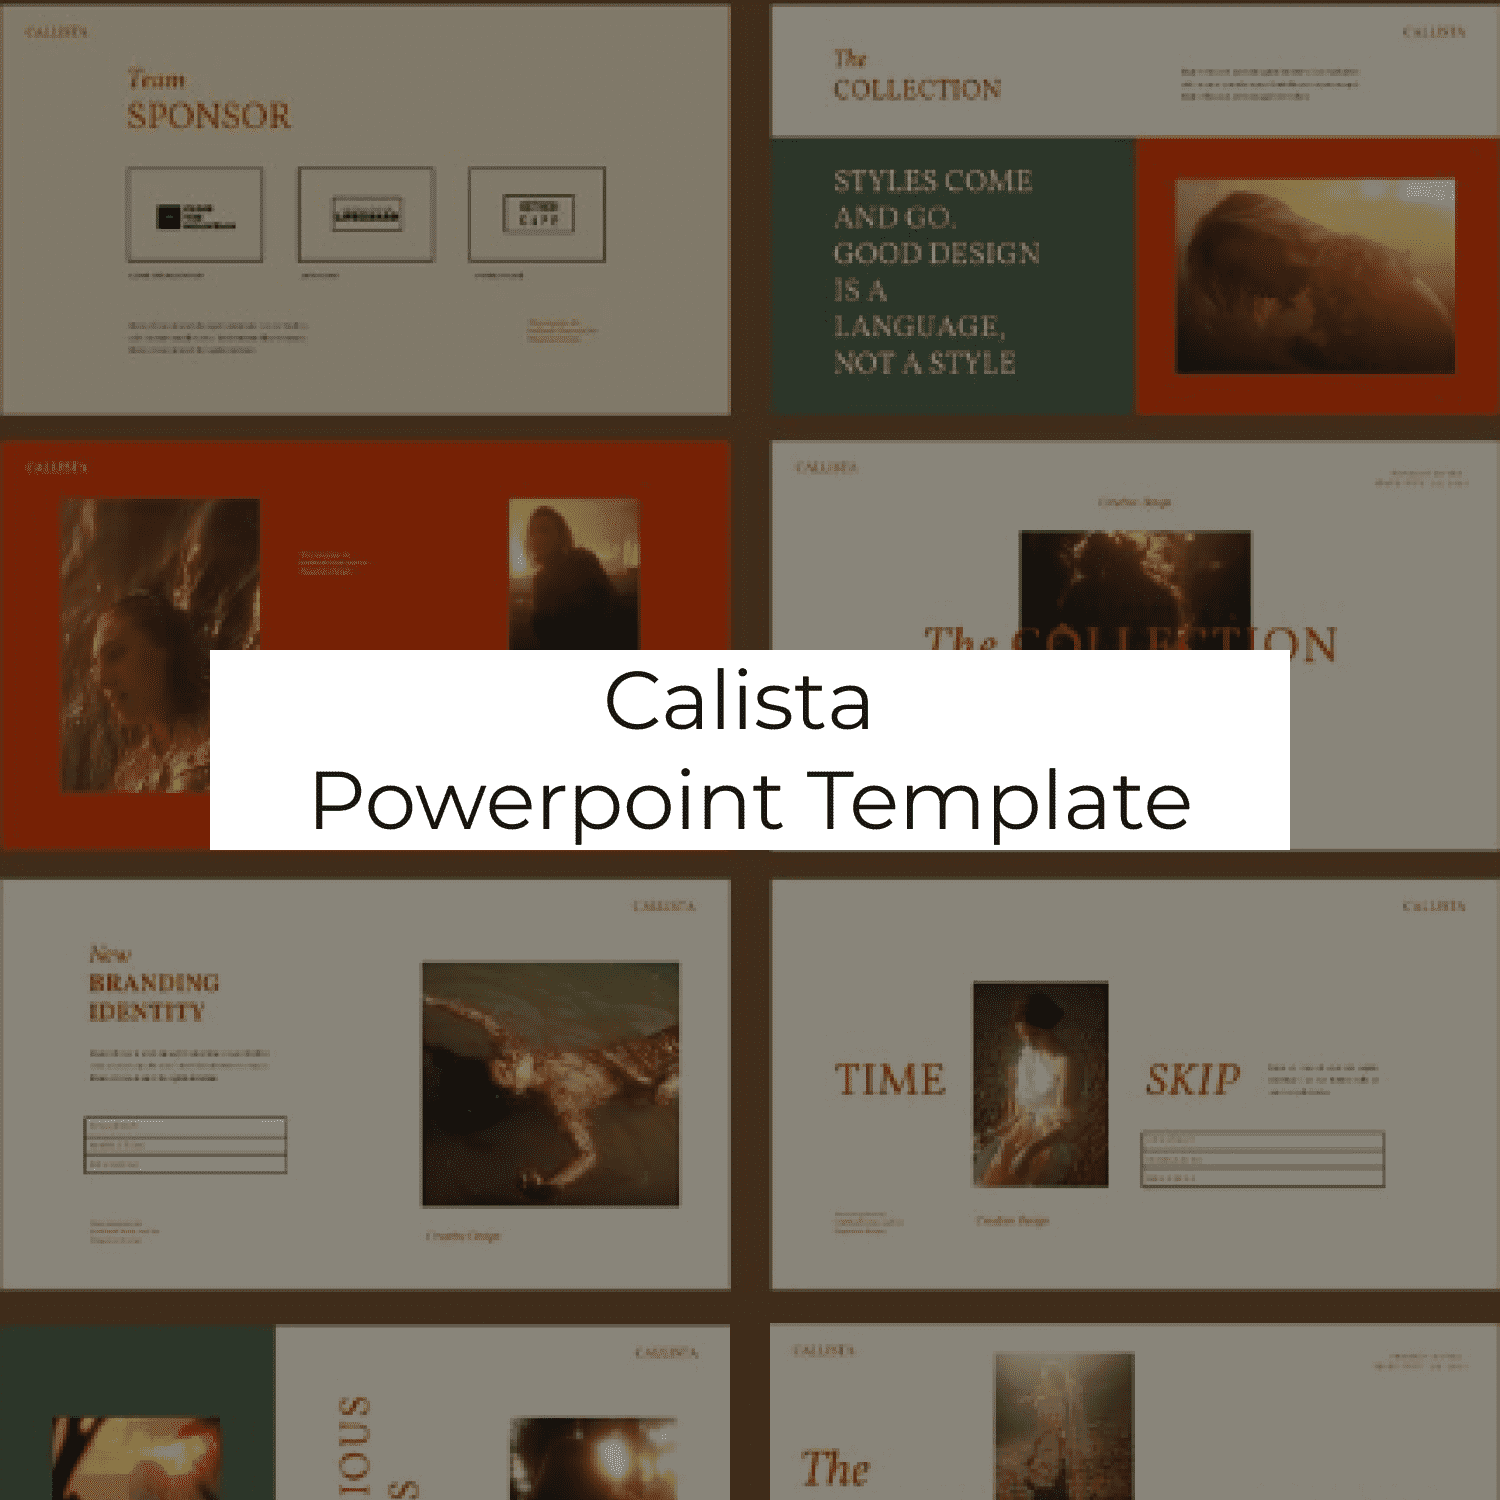 Calista Powerpoint Template cover iamge.